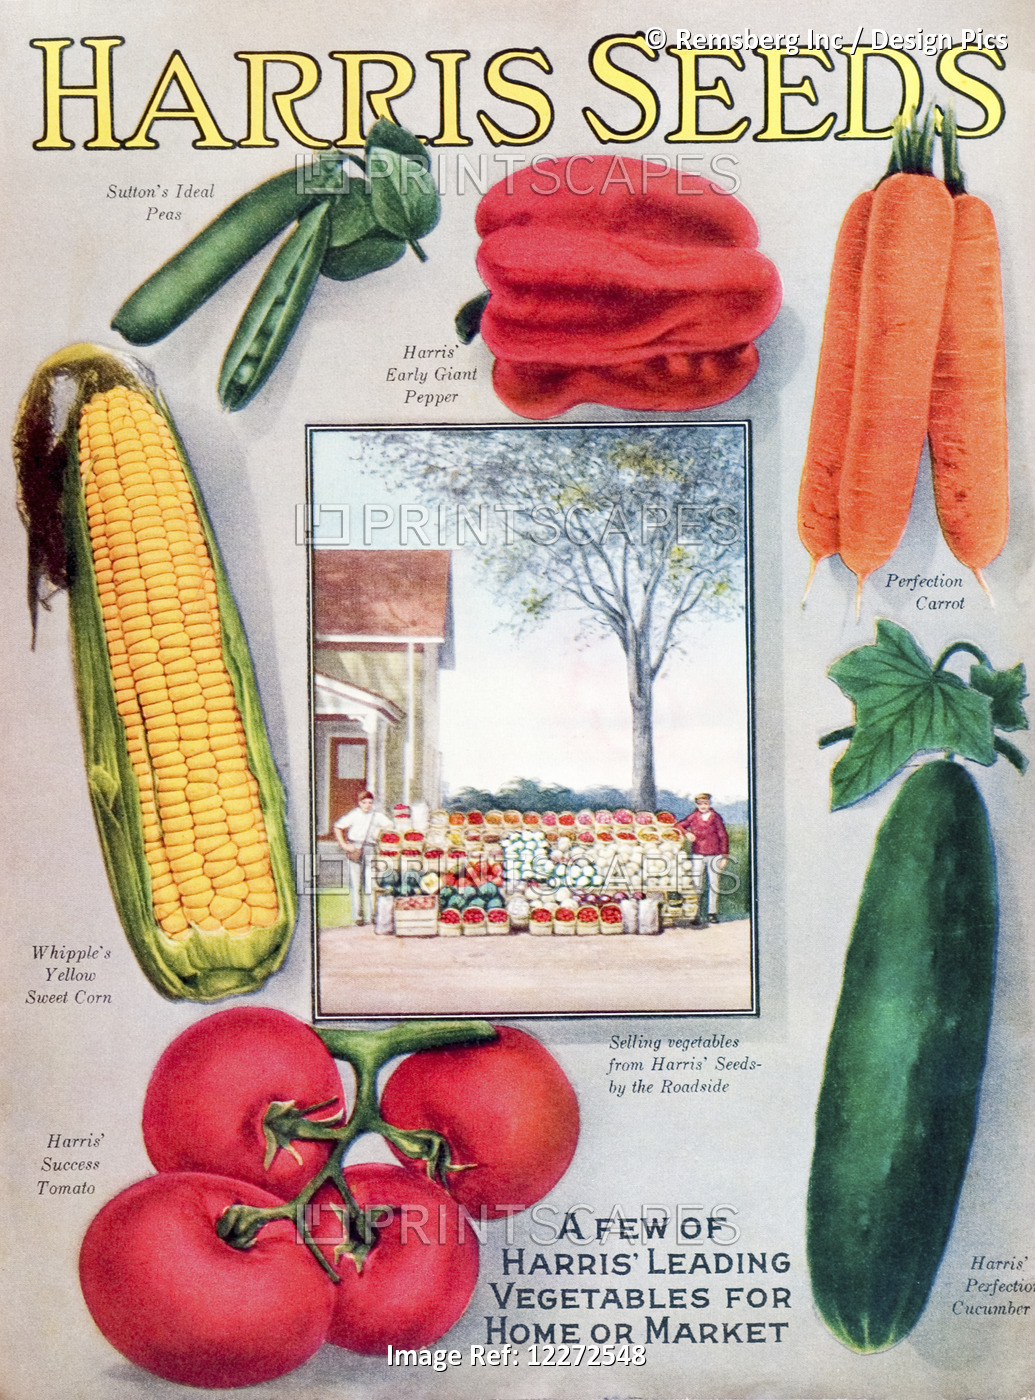 Historic Harris Seeds Catalog With Illustration Of Vegetables From 20th Century.